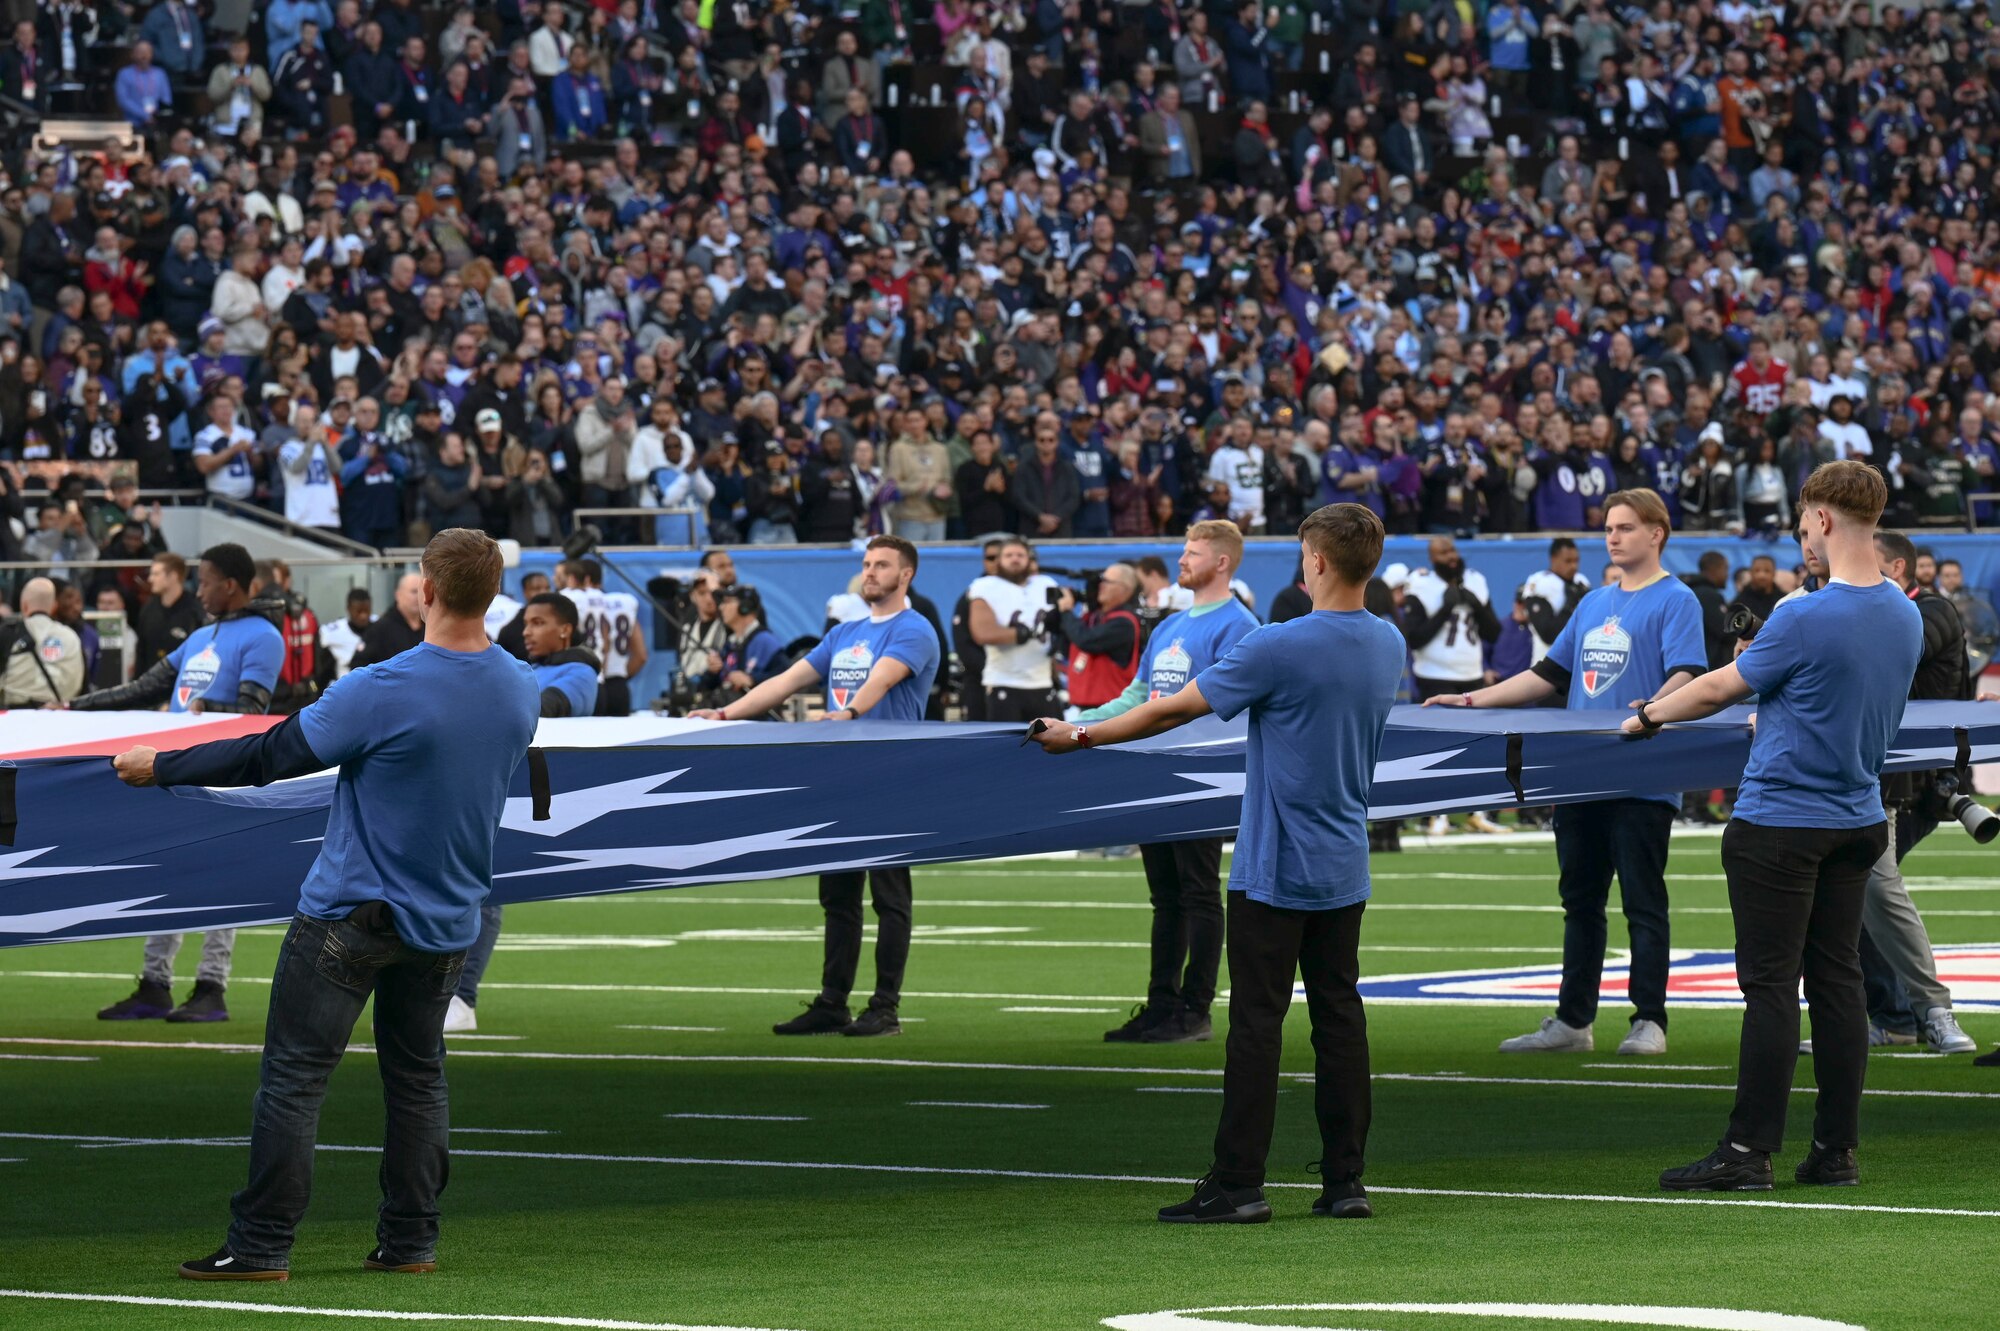 As part of the pre-game ceremony, Airmen presented a U.S. flag alongside a U.K. flag presented by British service members.